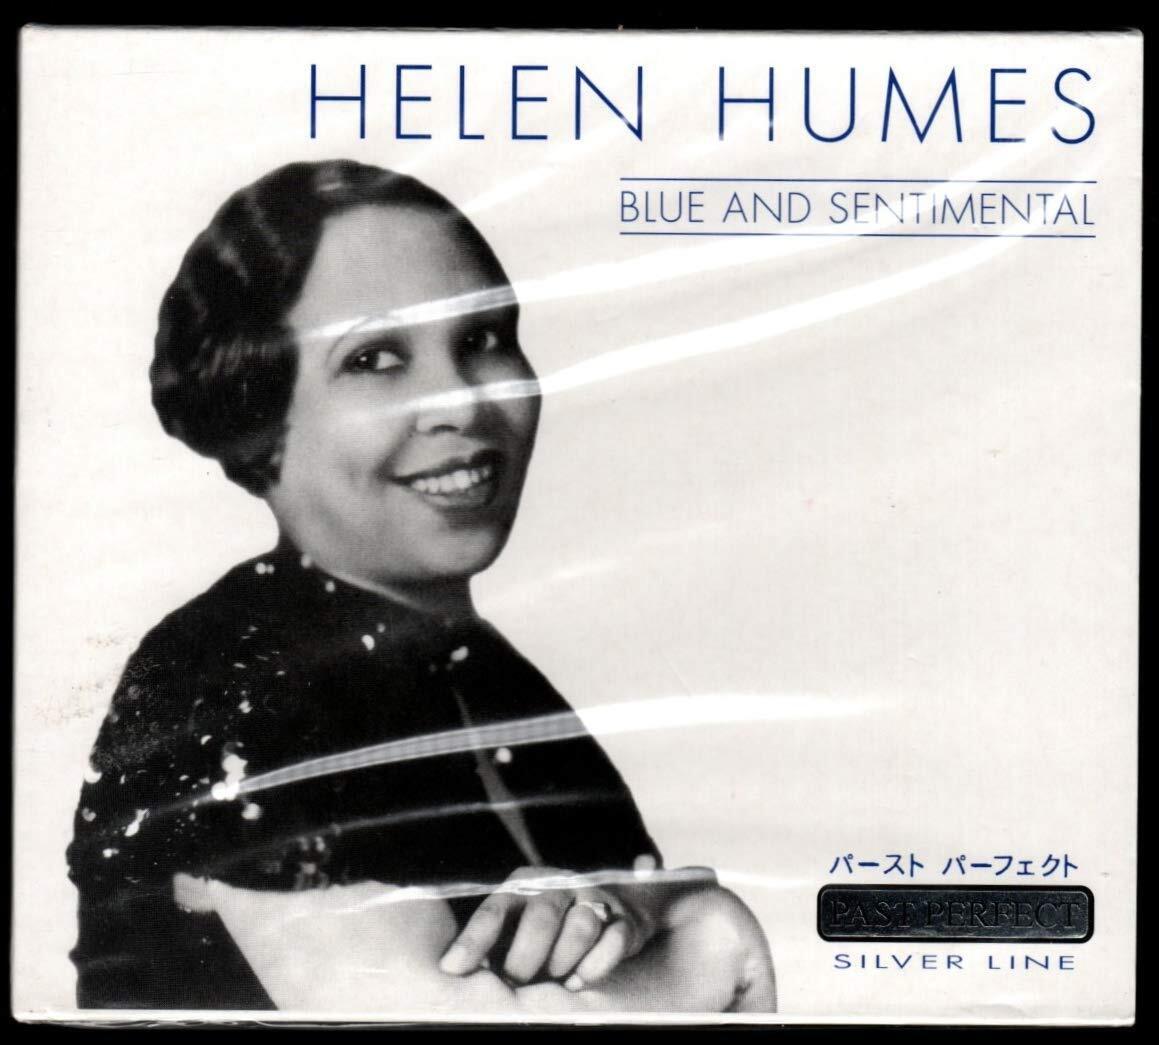 Blue & Sentimental by Humes, Helen [2002-11-27]  - Music CD - New